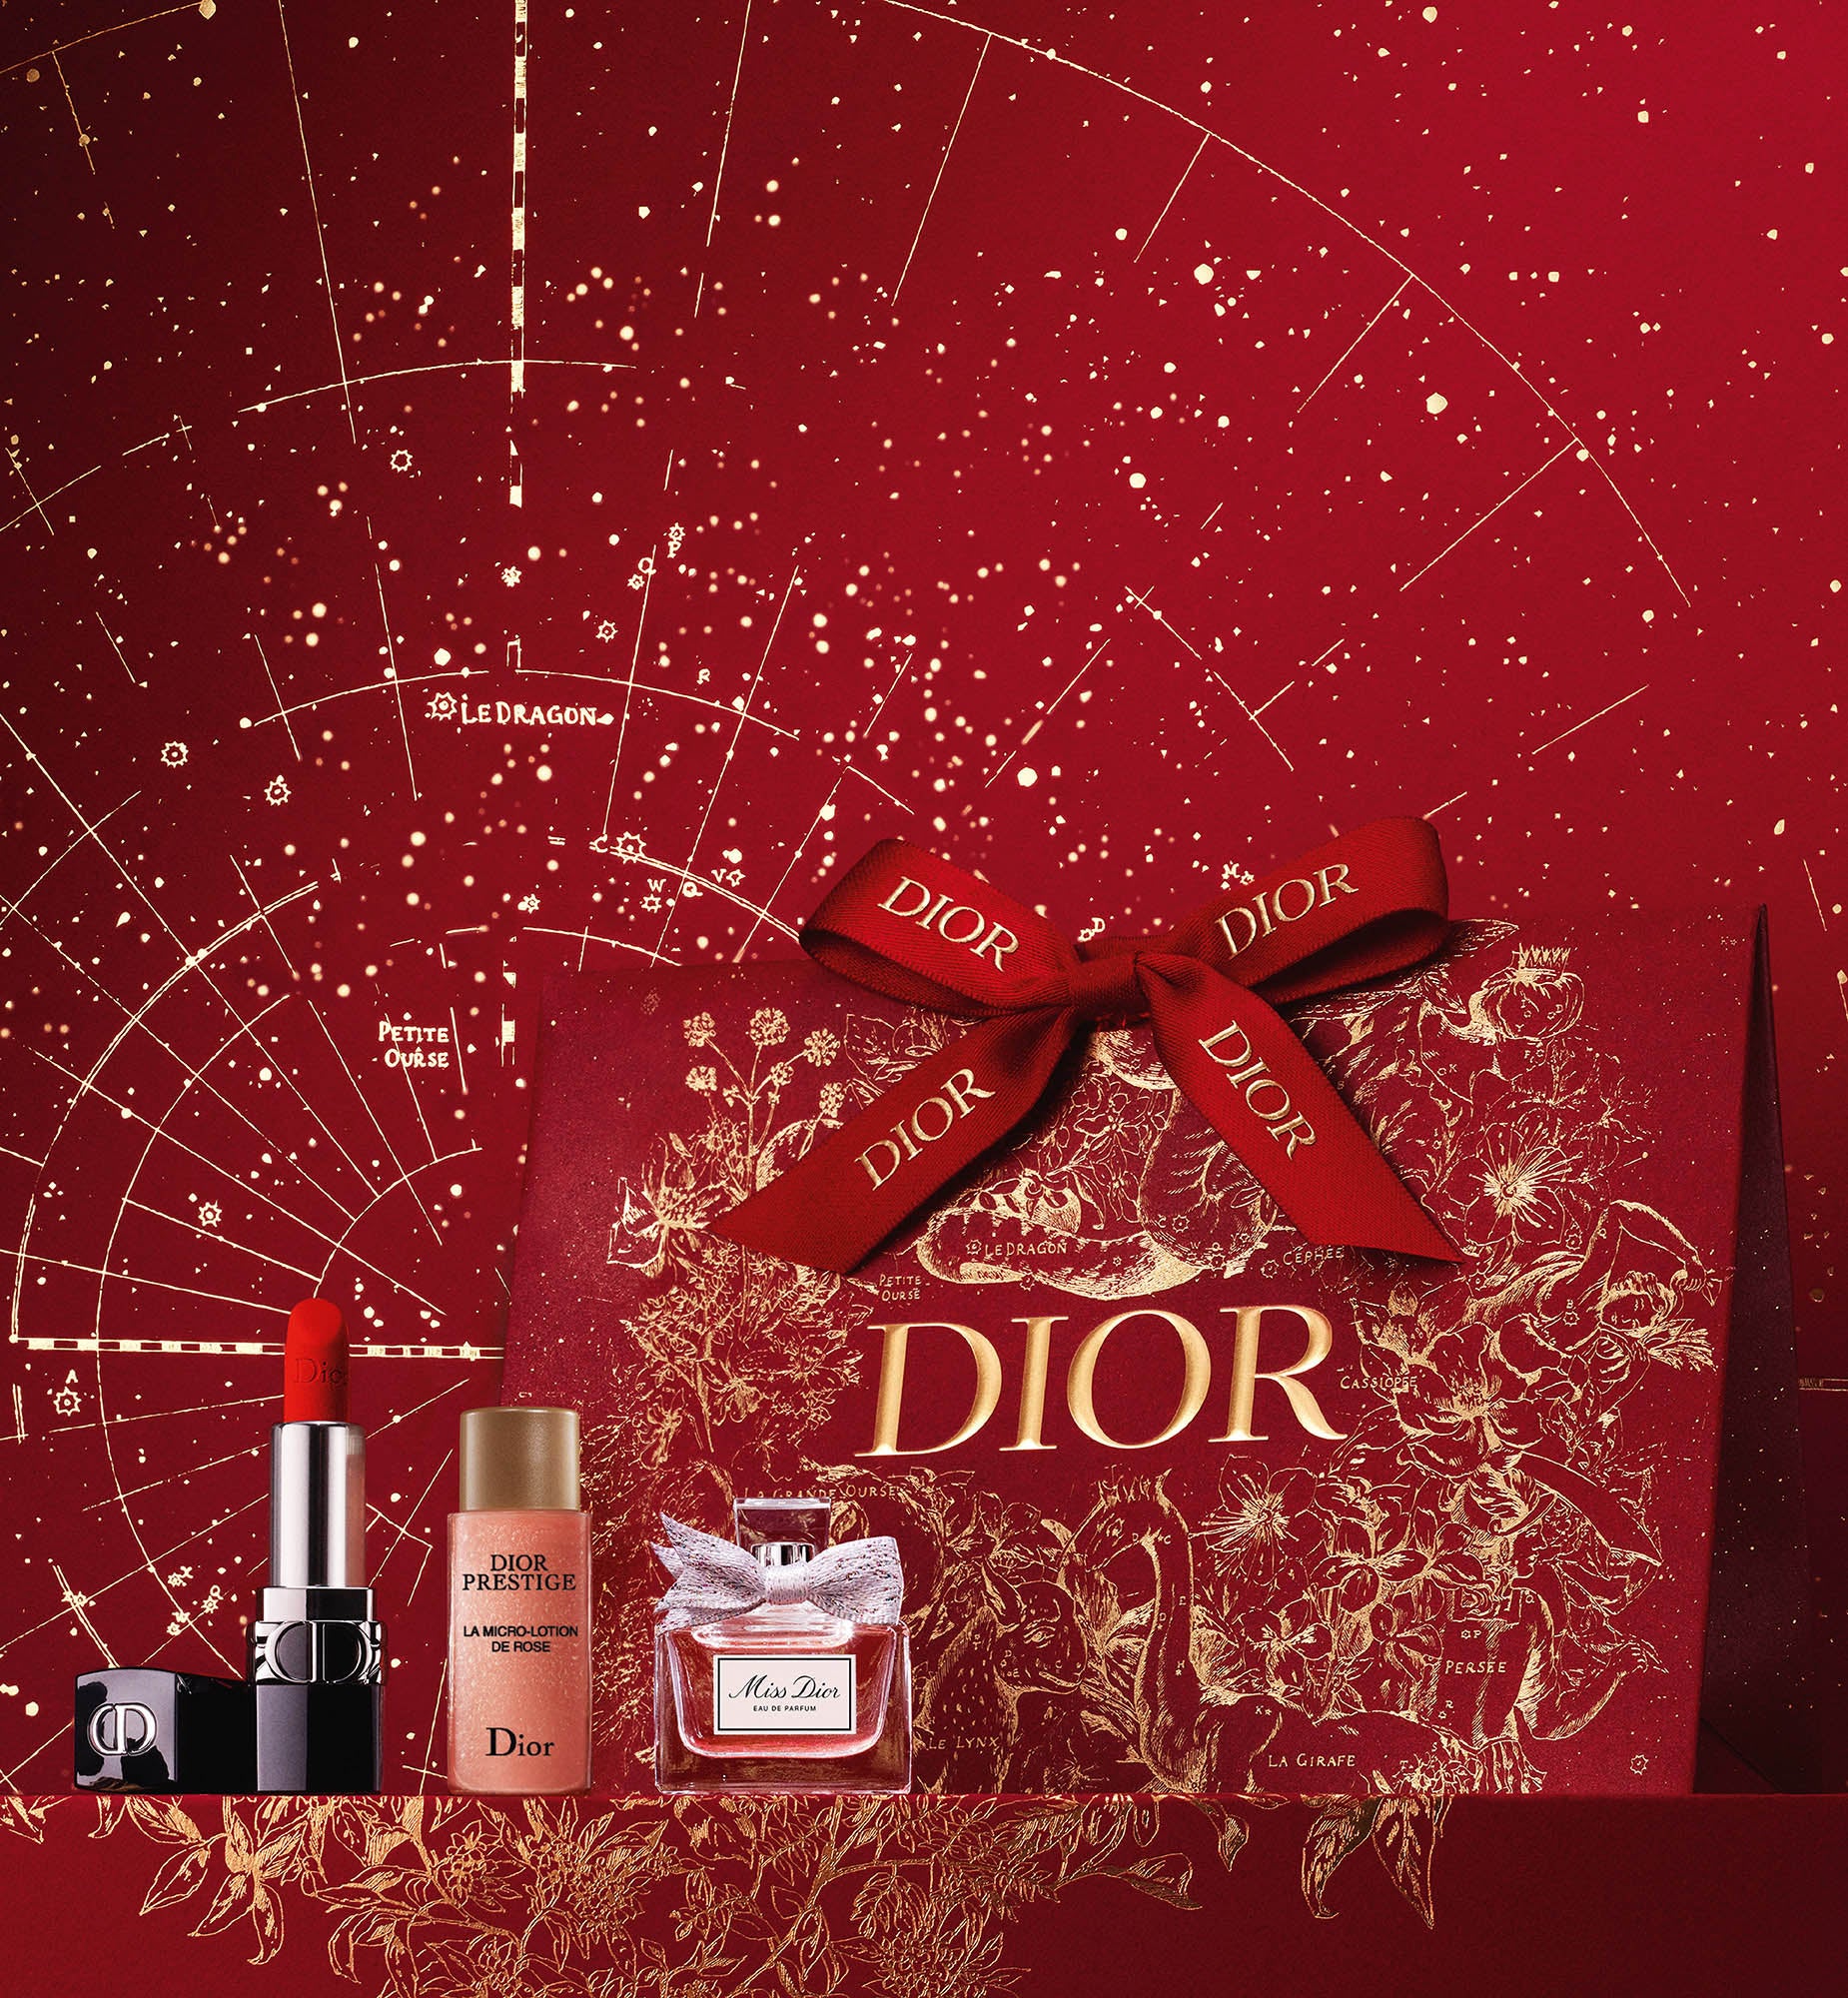 Dior Celebrate Chinese New Year - Stilettoes Diva